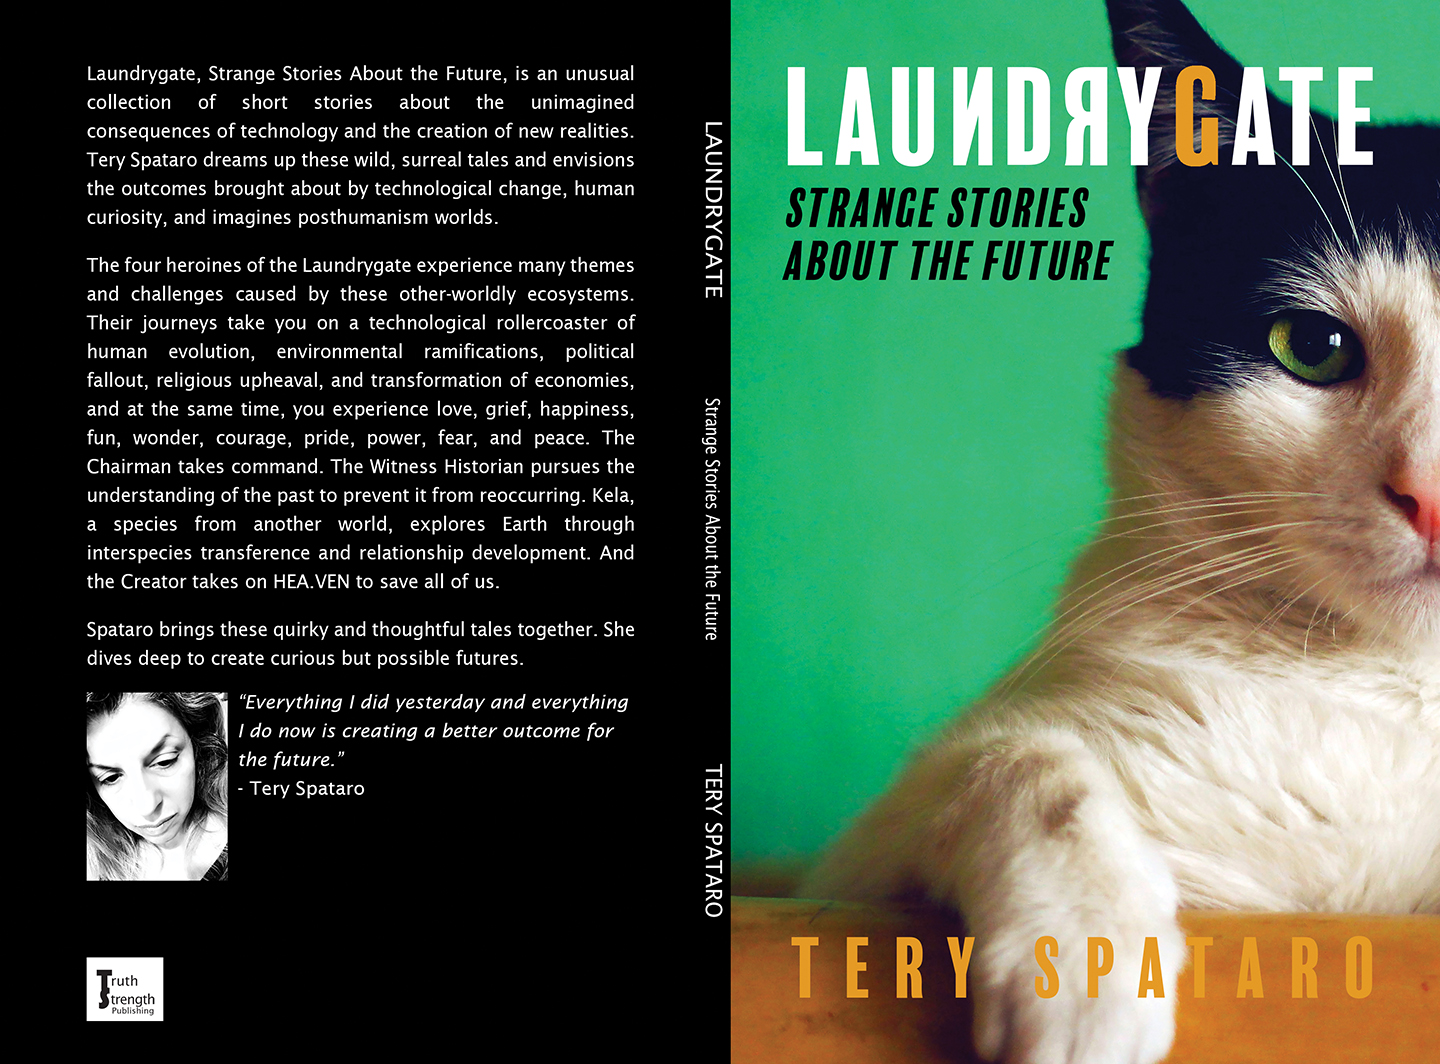 Laundrygate Strange Stories About the Future book by Tery Spataro